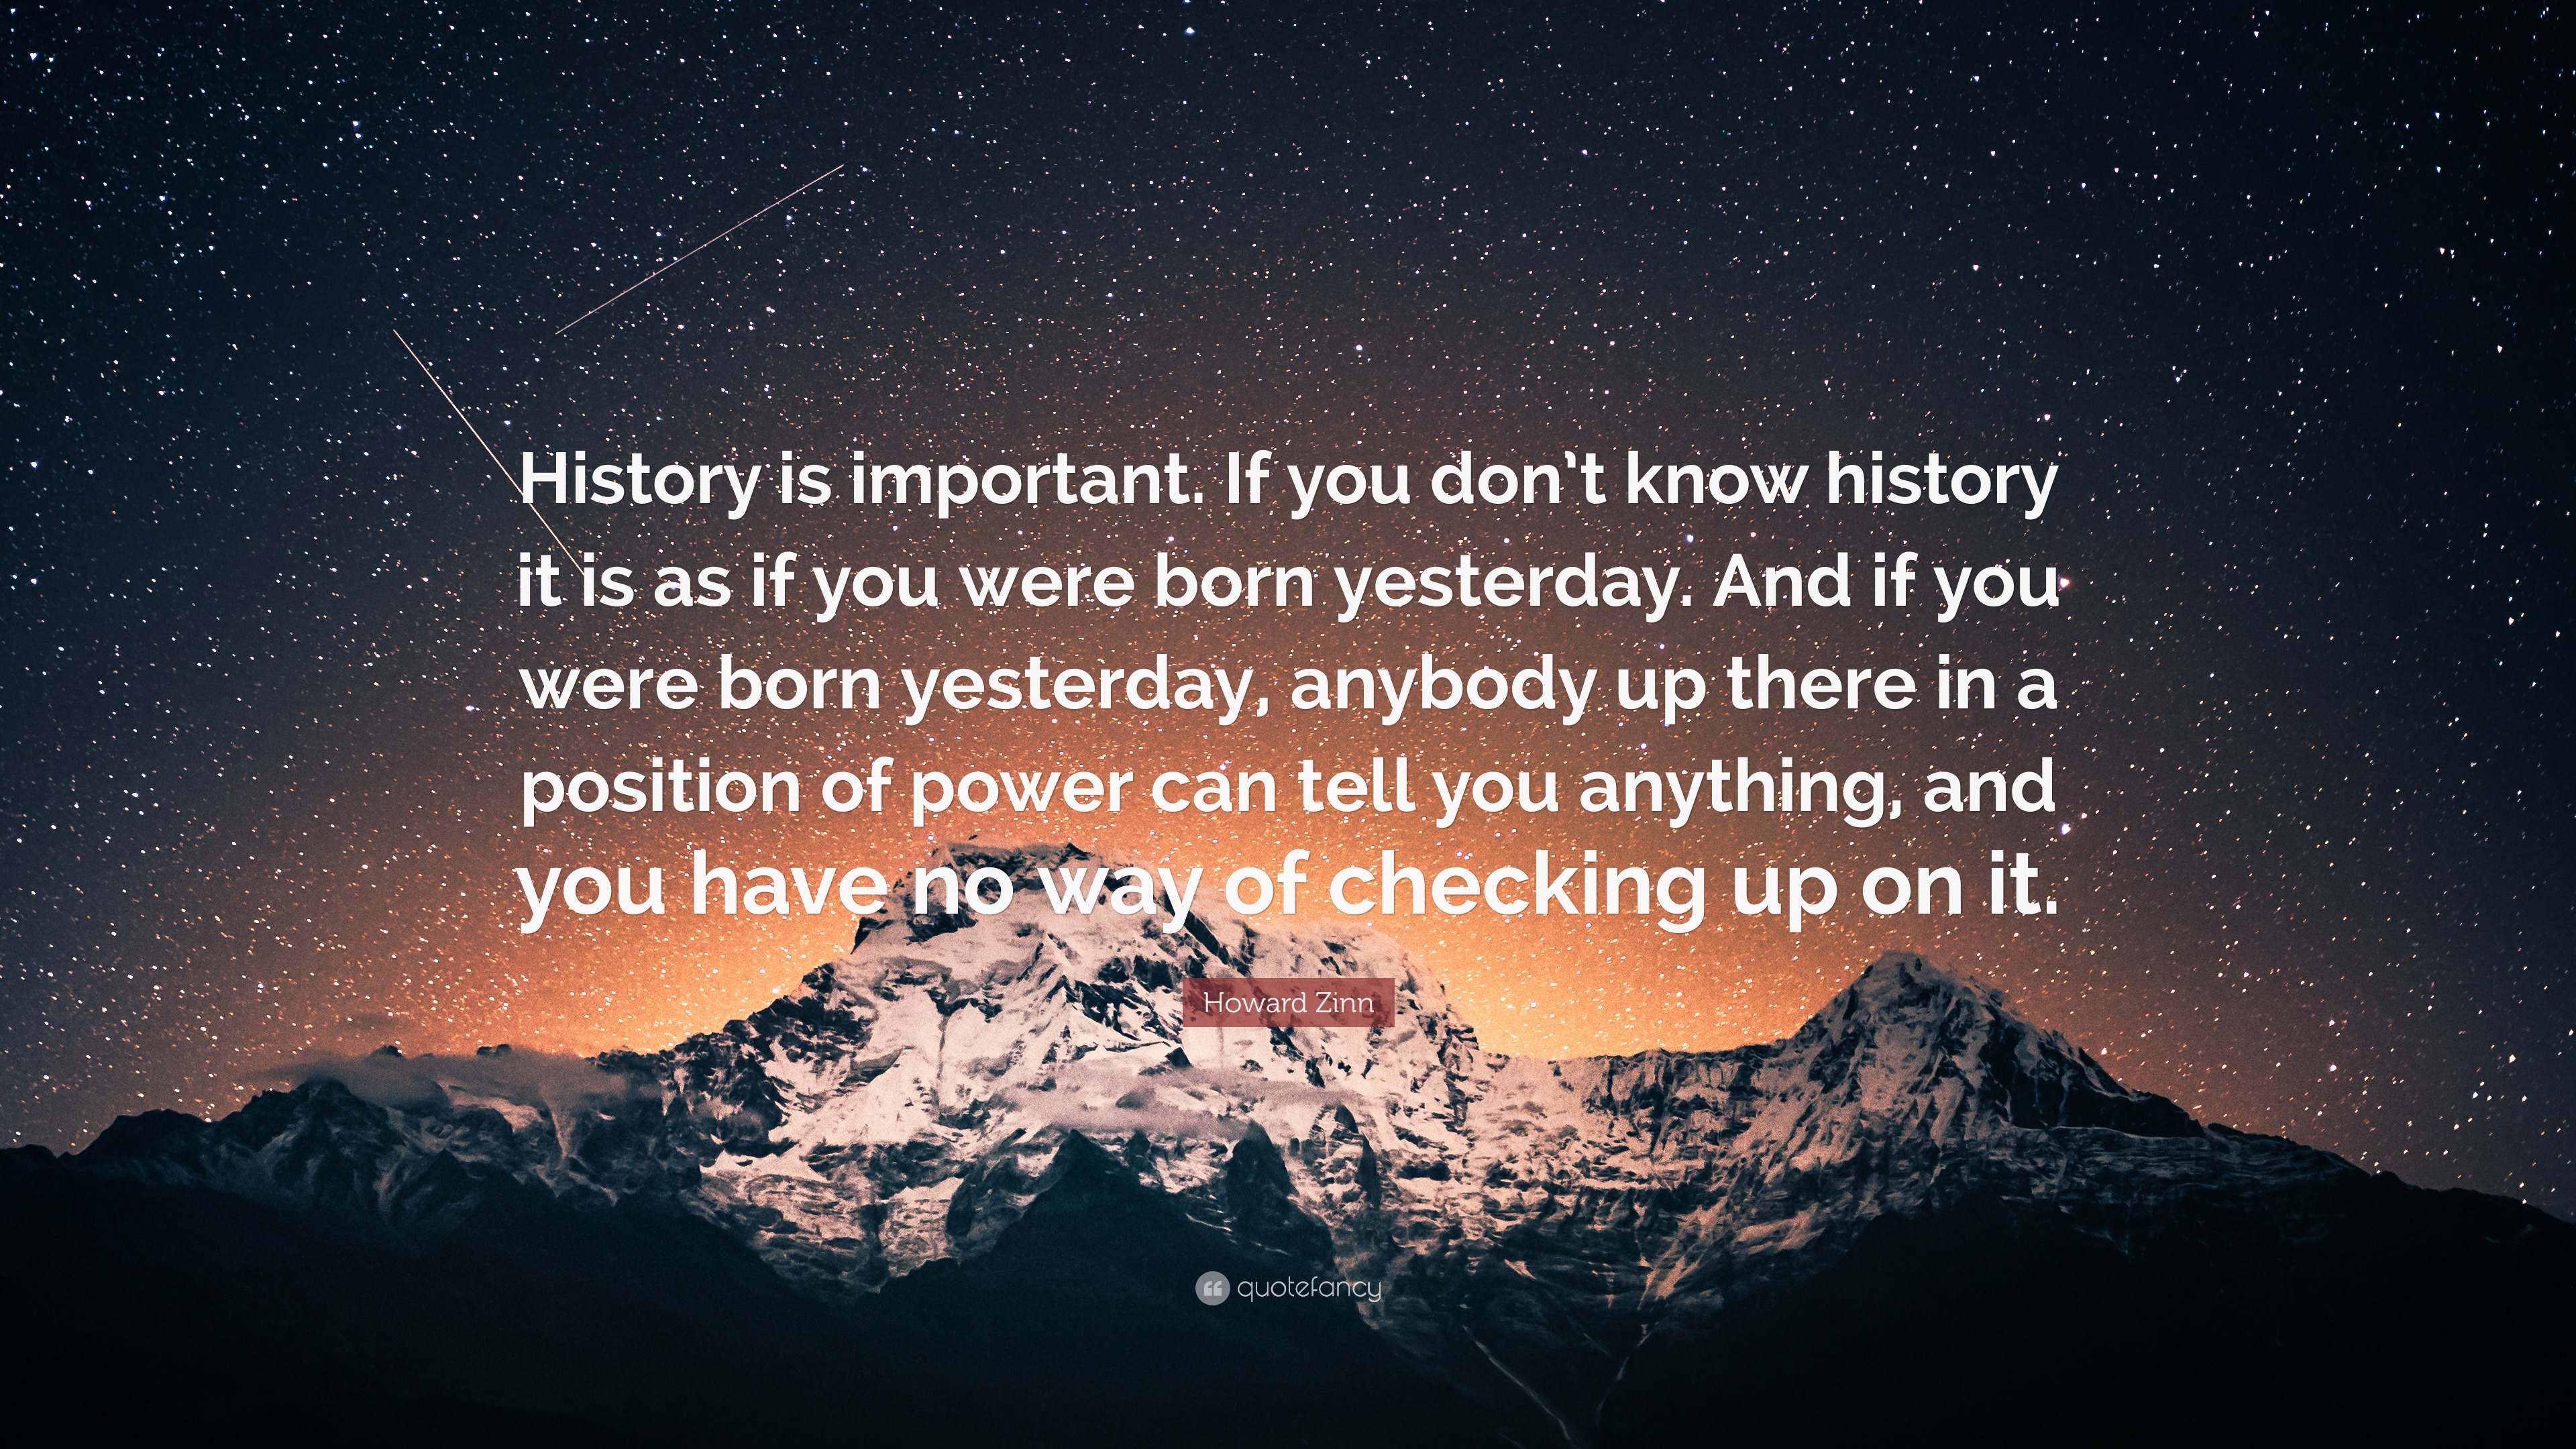 Amazing Importance Of History Quotes in the world Learn more here 